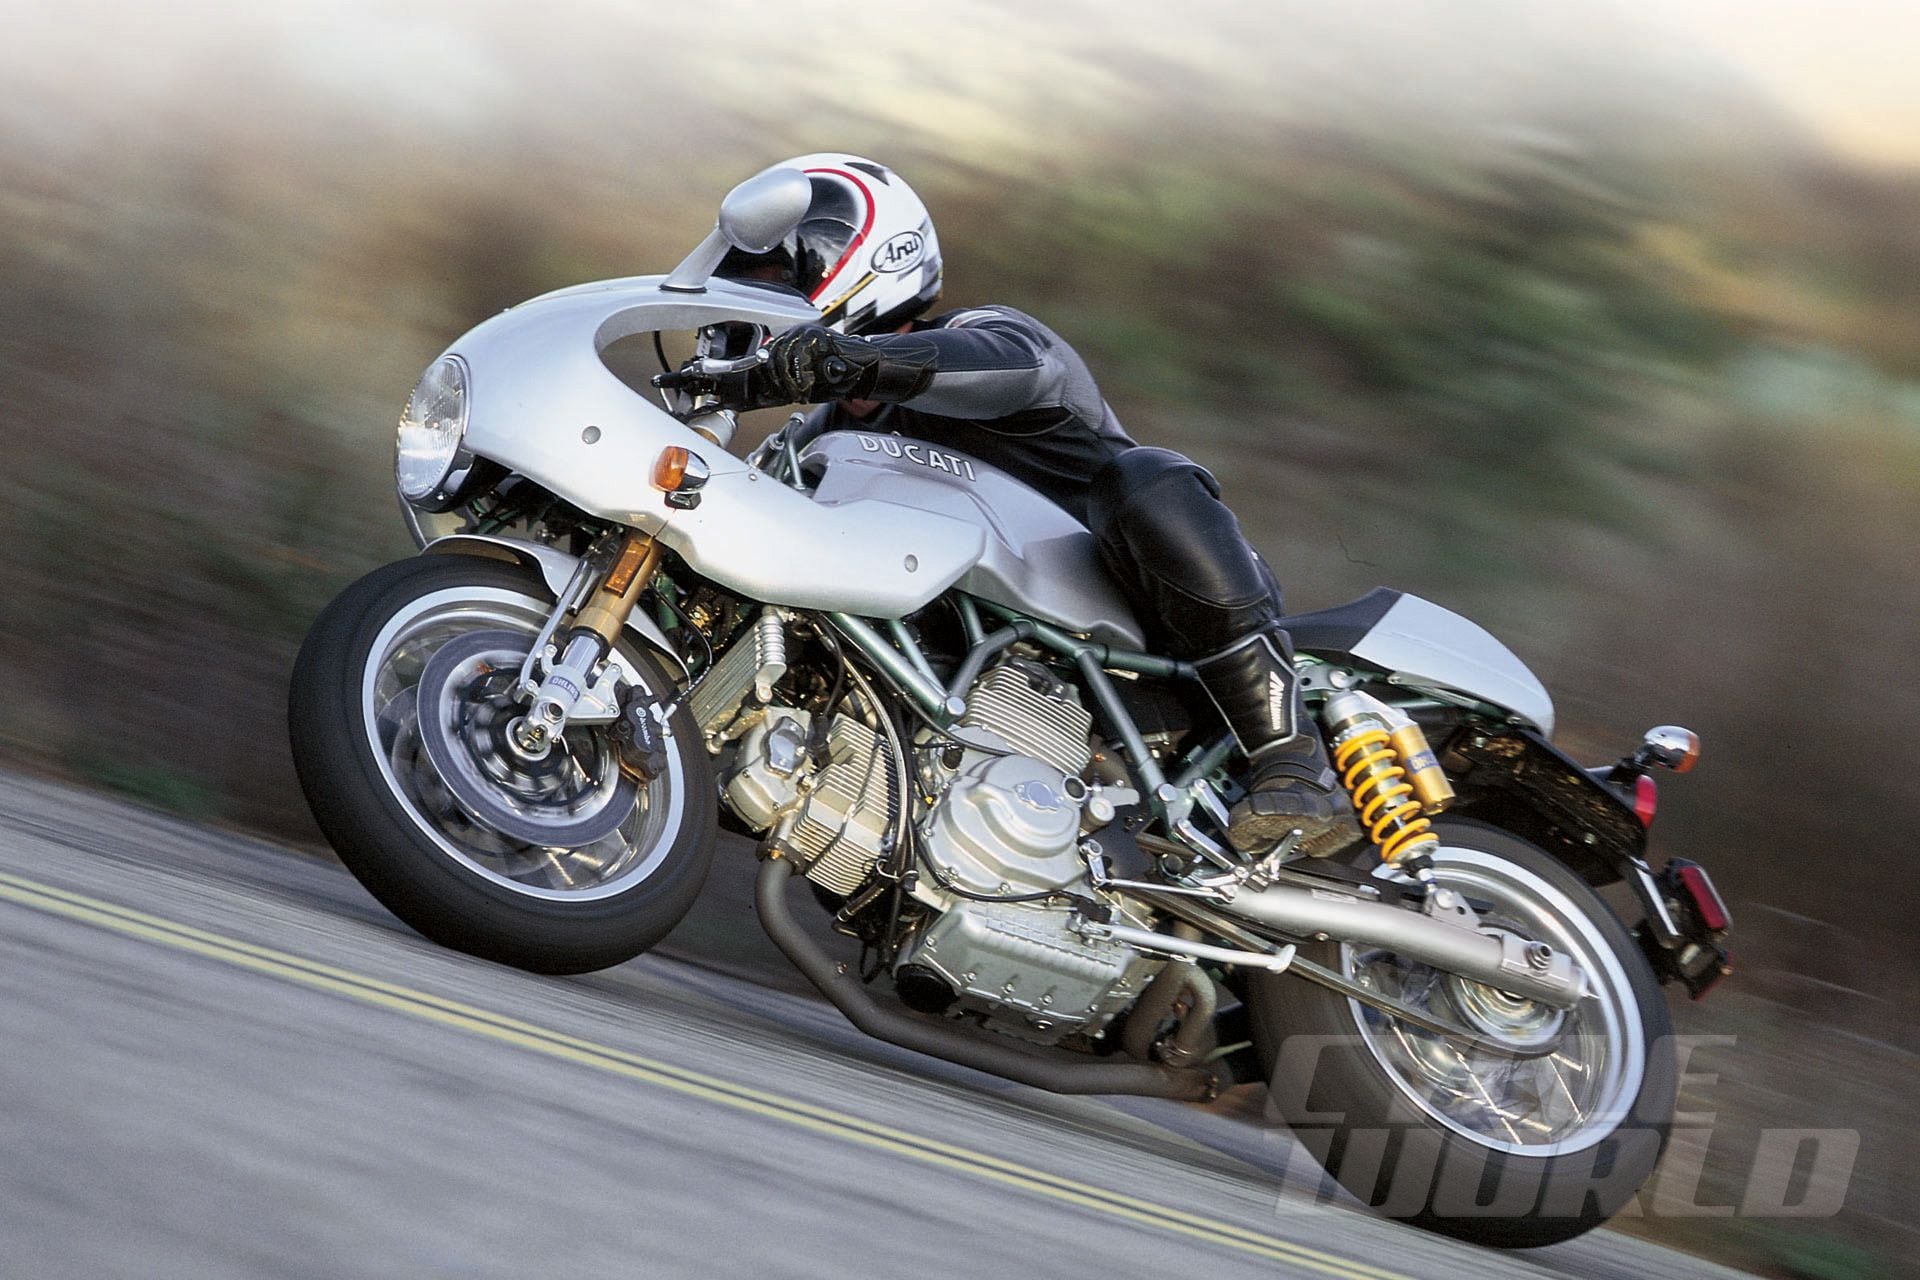 Ducati Paul Smart 1000 SportClassic Motorcycle Review | Cycle World